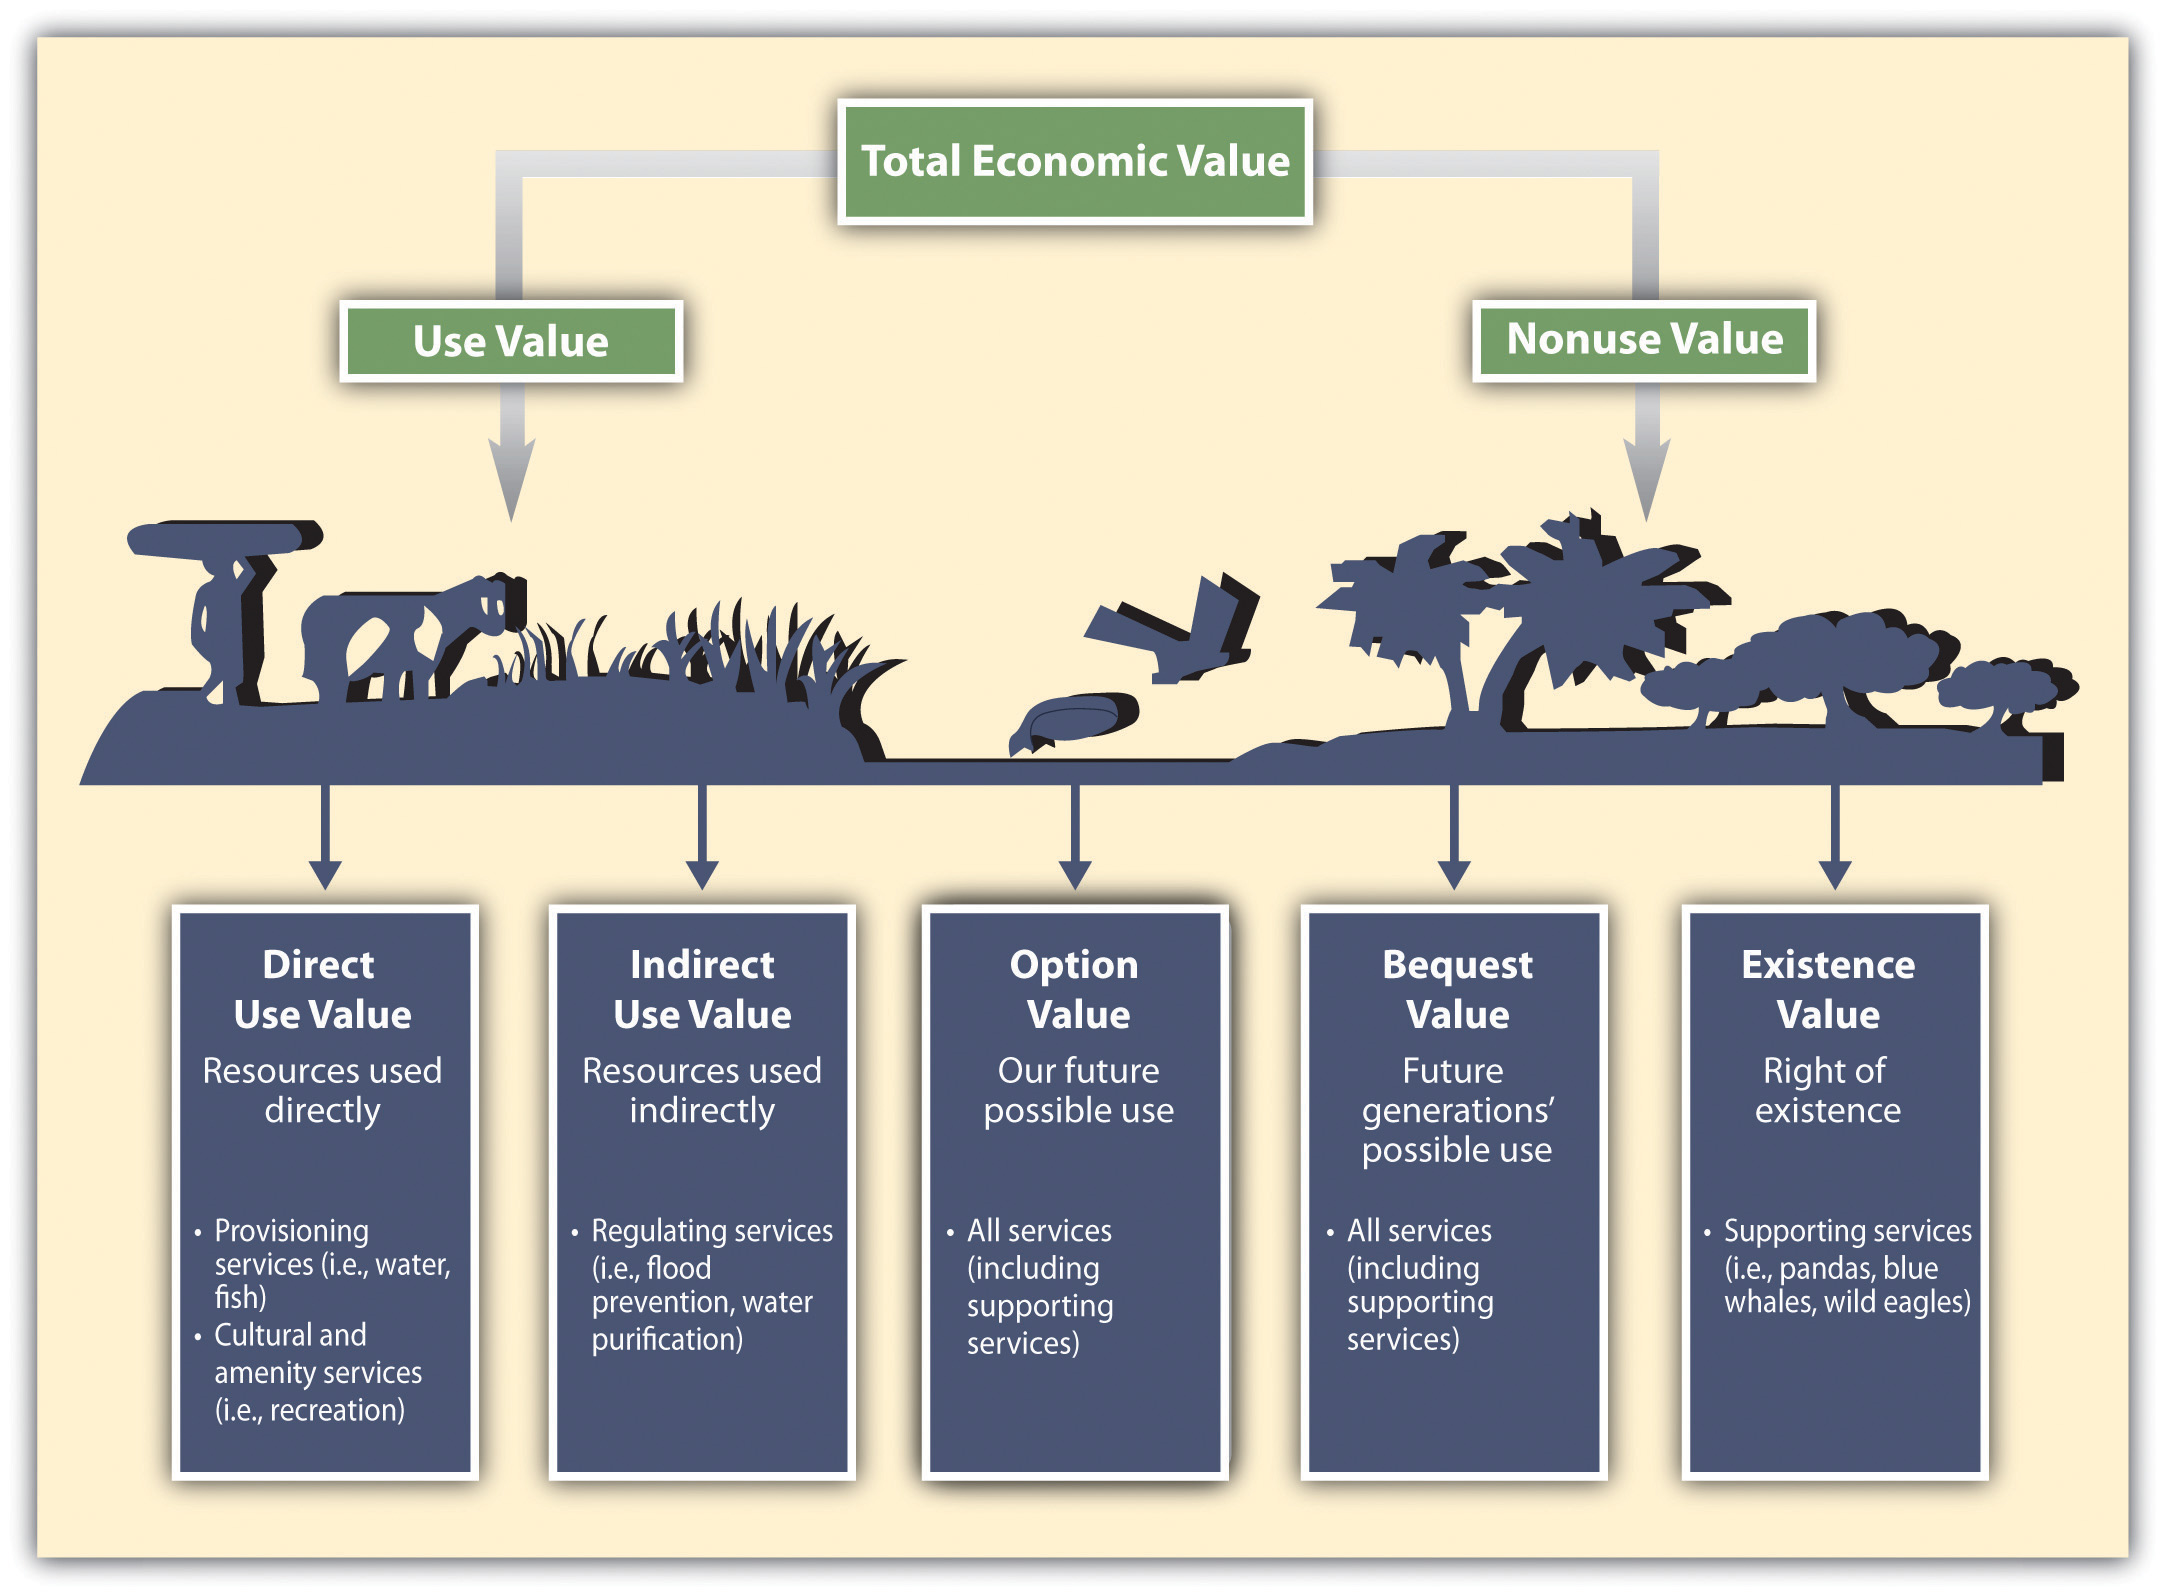 This image shows the total economic value branching off to use value and nonuse value. These two branch off to encompass direct use value, indirect use value, option value, bequest value, and existence value.